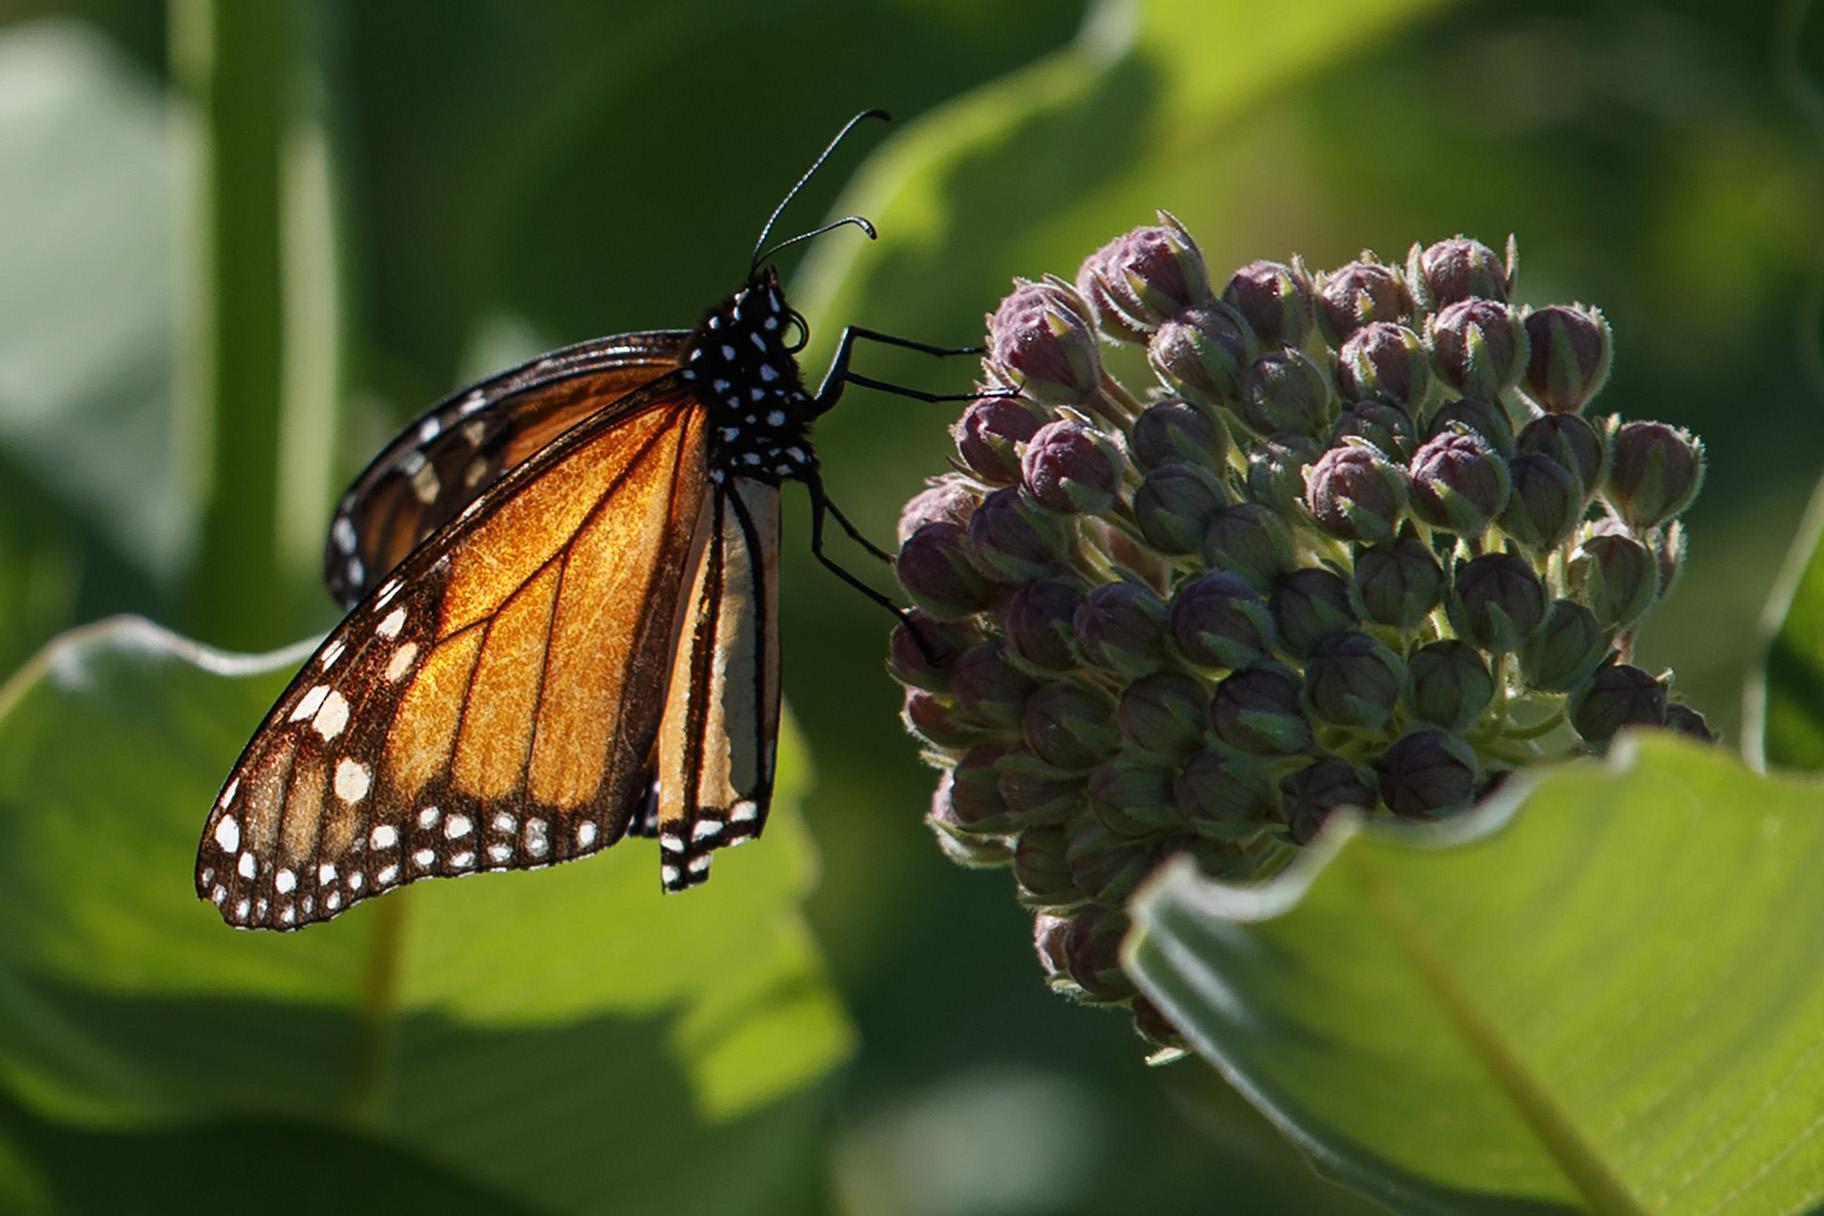 A monarch butterfly perches on milkweed at the Patuxent Wildlife Research Center in Laurel, Maryland on Friday, May 31, 2019. Farming and other human development have eradicated state-size swaths of its native milkweed habitat, cutting the butterfly's numbers by 90% over the last two decades. (AP Photo / Carolyn Kaster)